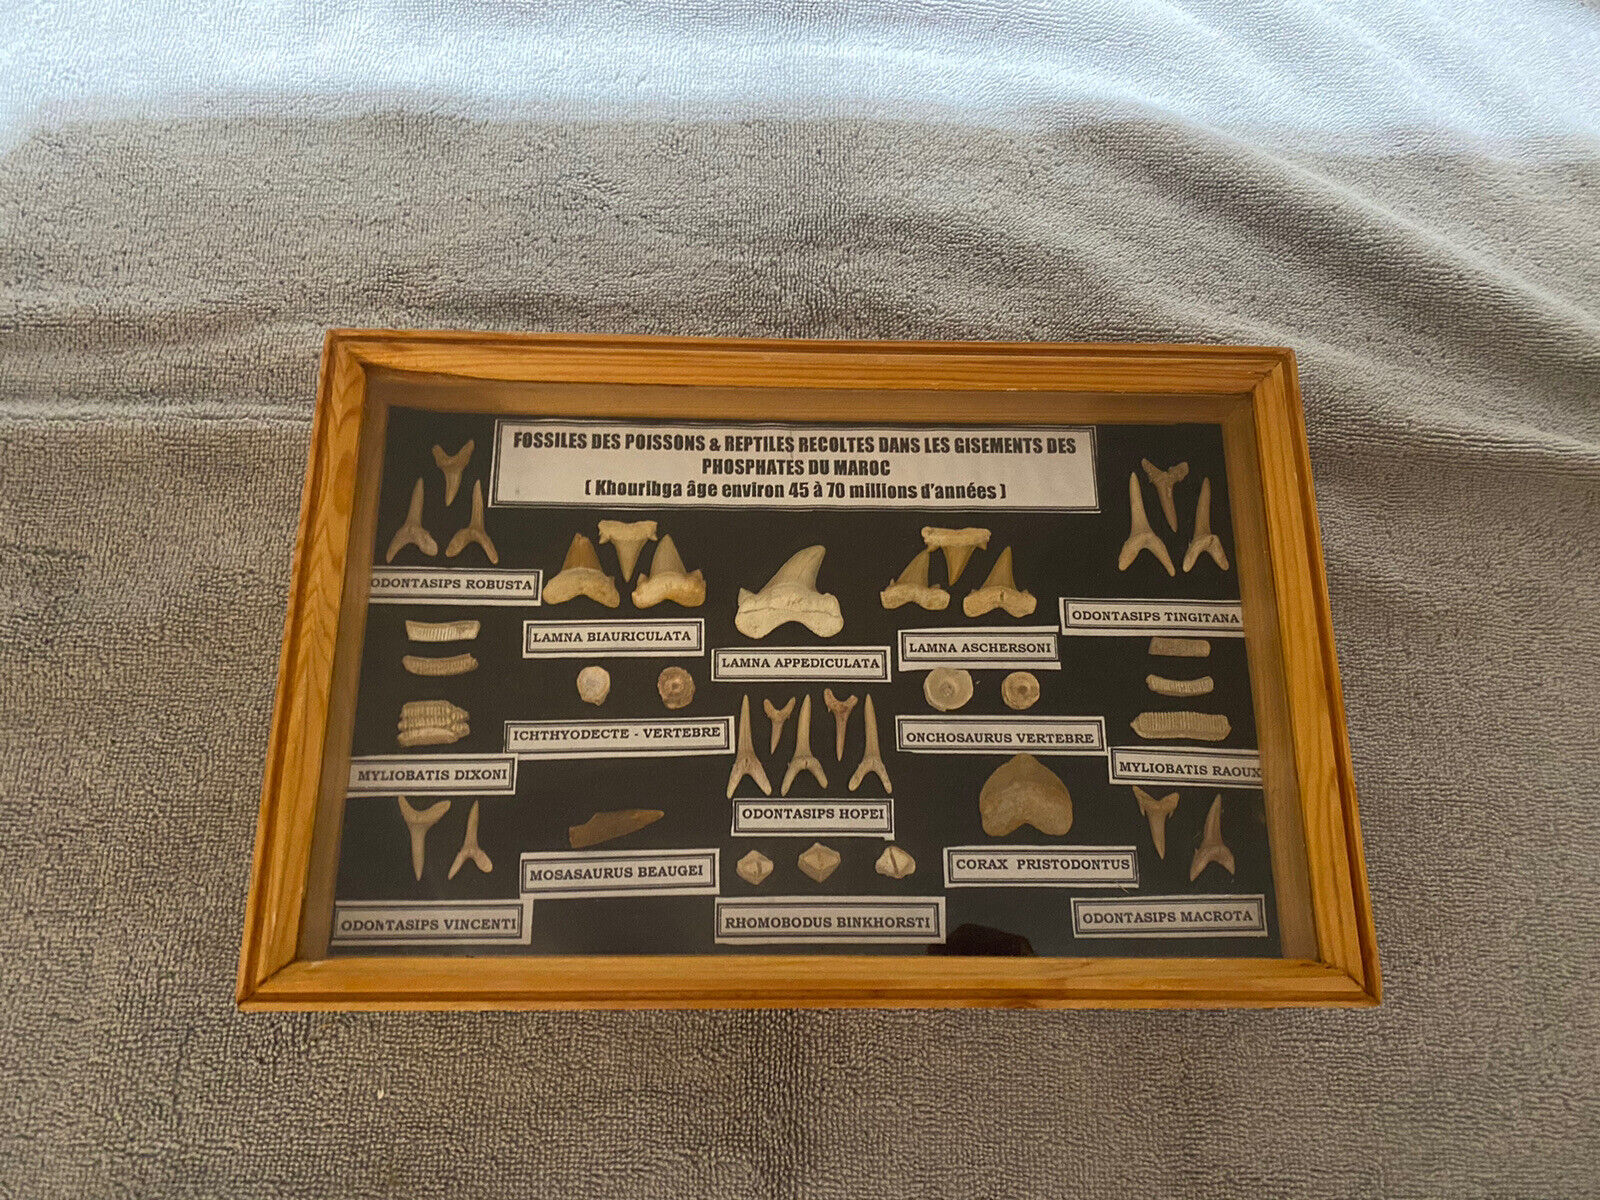 AUTHENTIC SHARK TEETH FOSSILS COLLECTION IN FRAMED GLASS DISPLAY SHADOW BOX